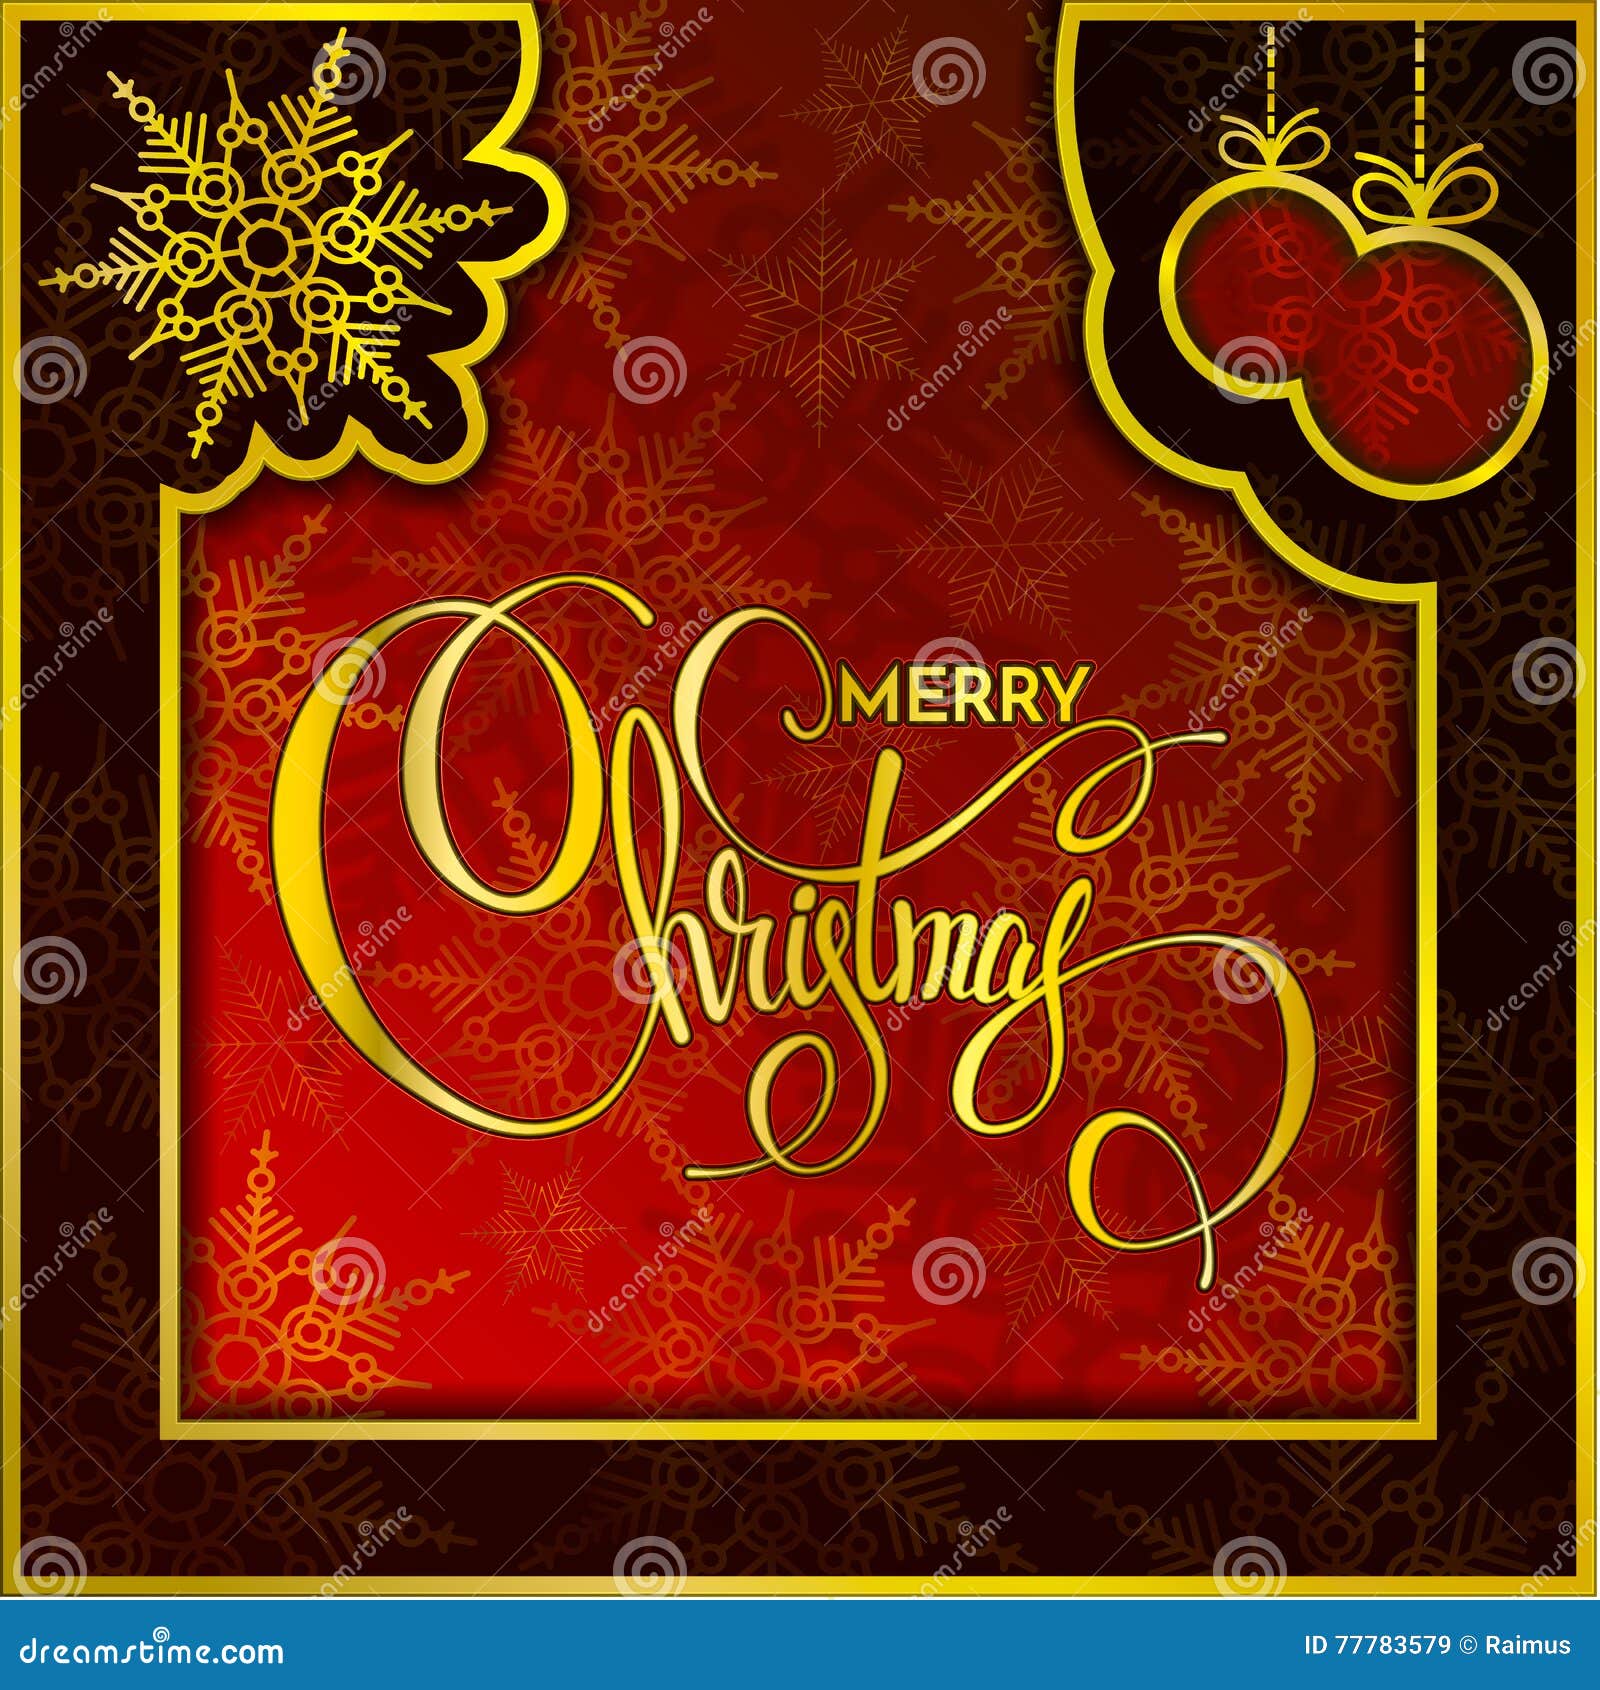 Download Christmas Background With Snow Wood Texture. Vector ...